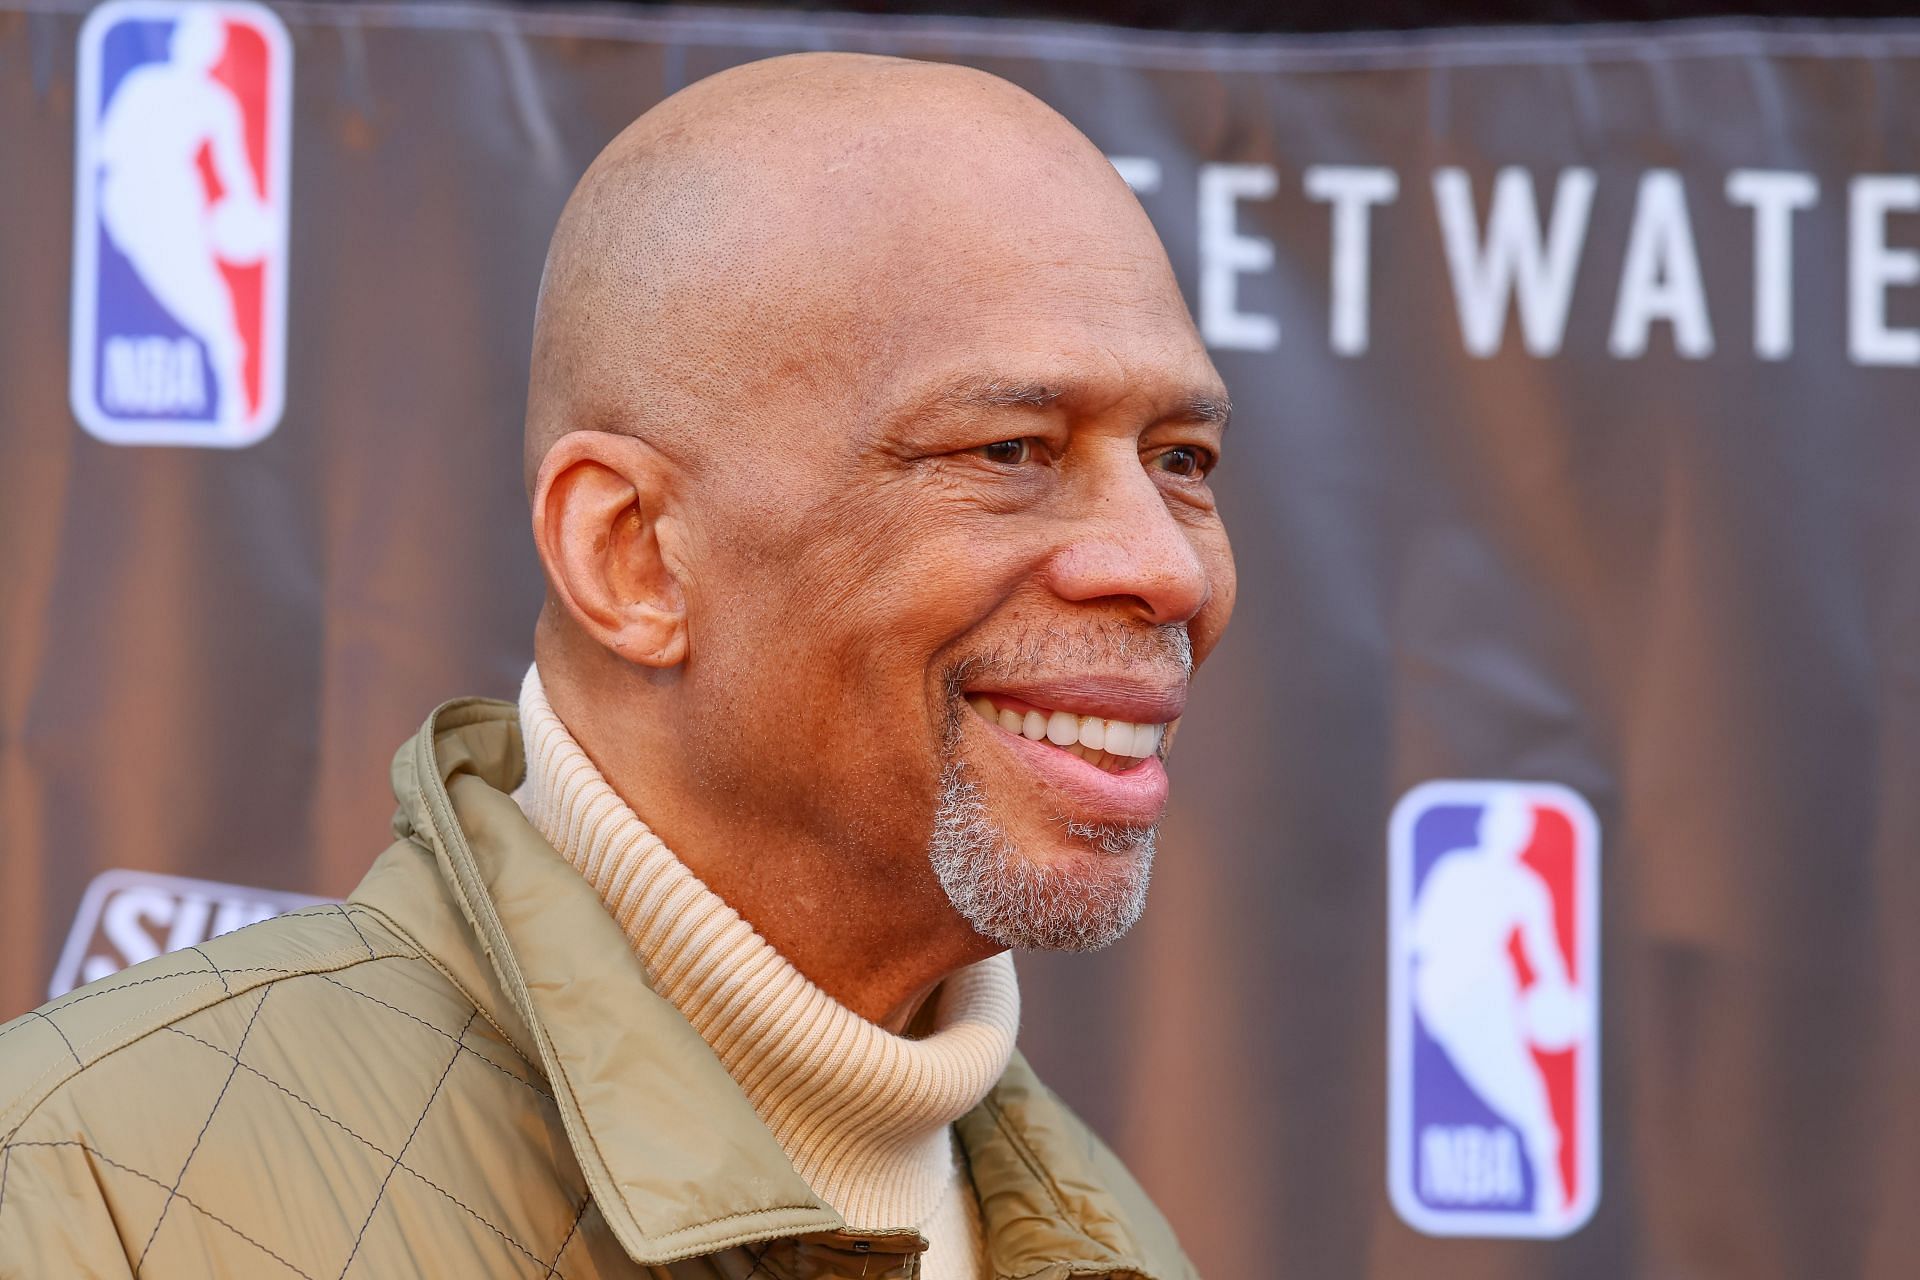 Abdul-Jabbar was involved in one of the biggest NBA trades of all time (Image via Getty Images)